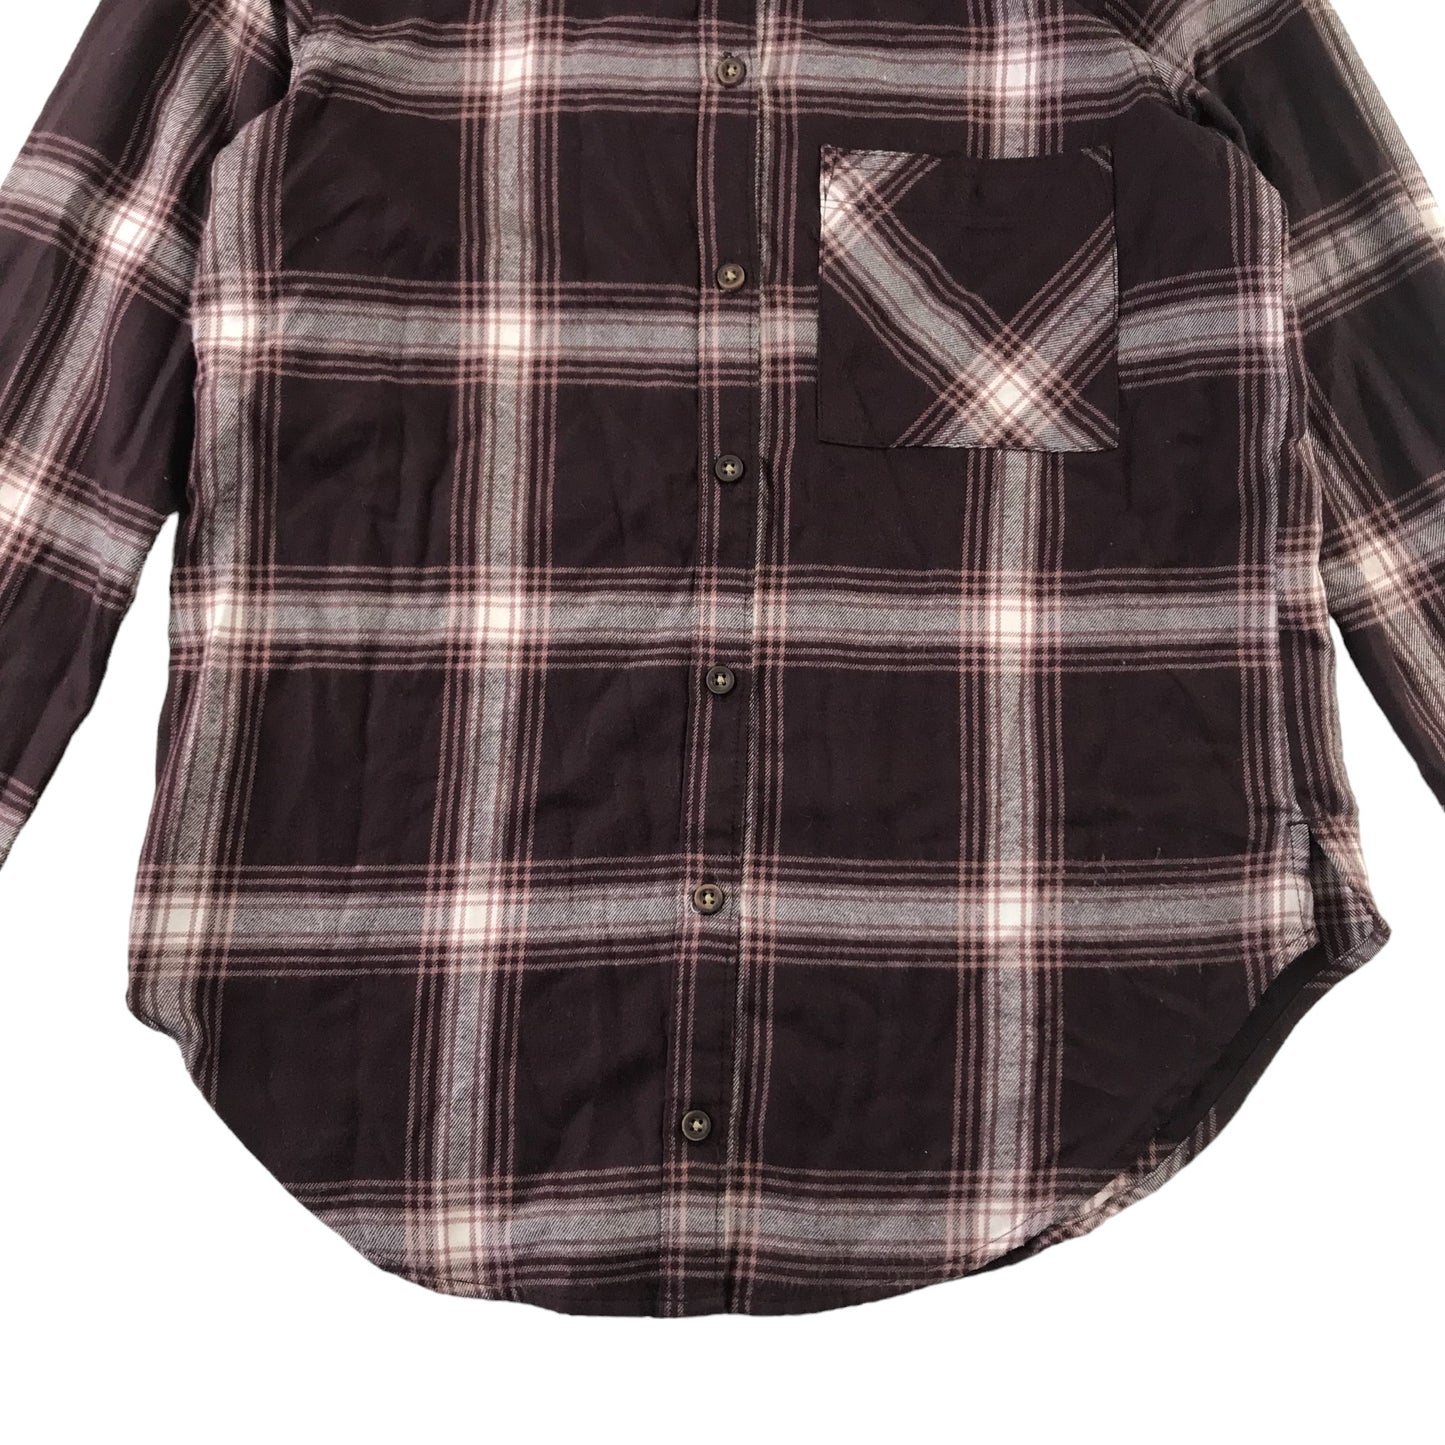 Abercrombie & Fitch Shirt Size Adult XS Dark Burgundy Checked Long Sleeve Button Up